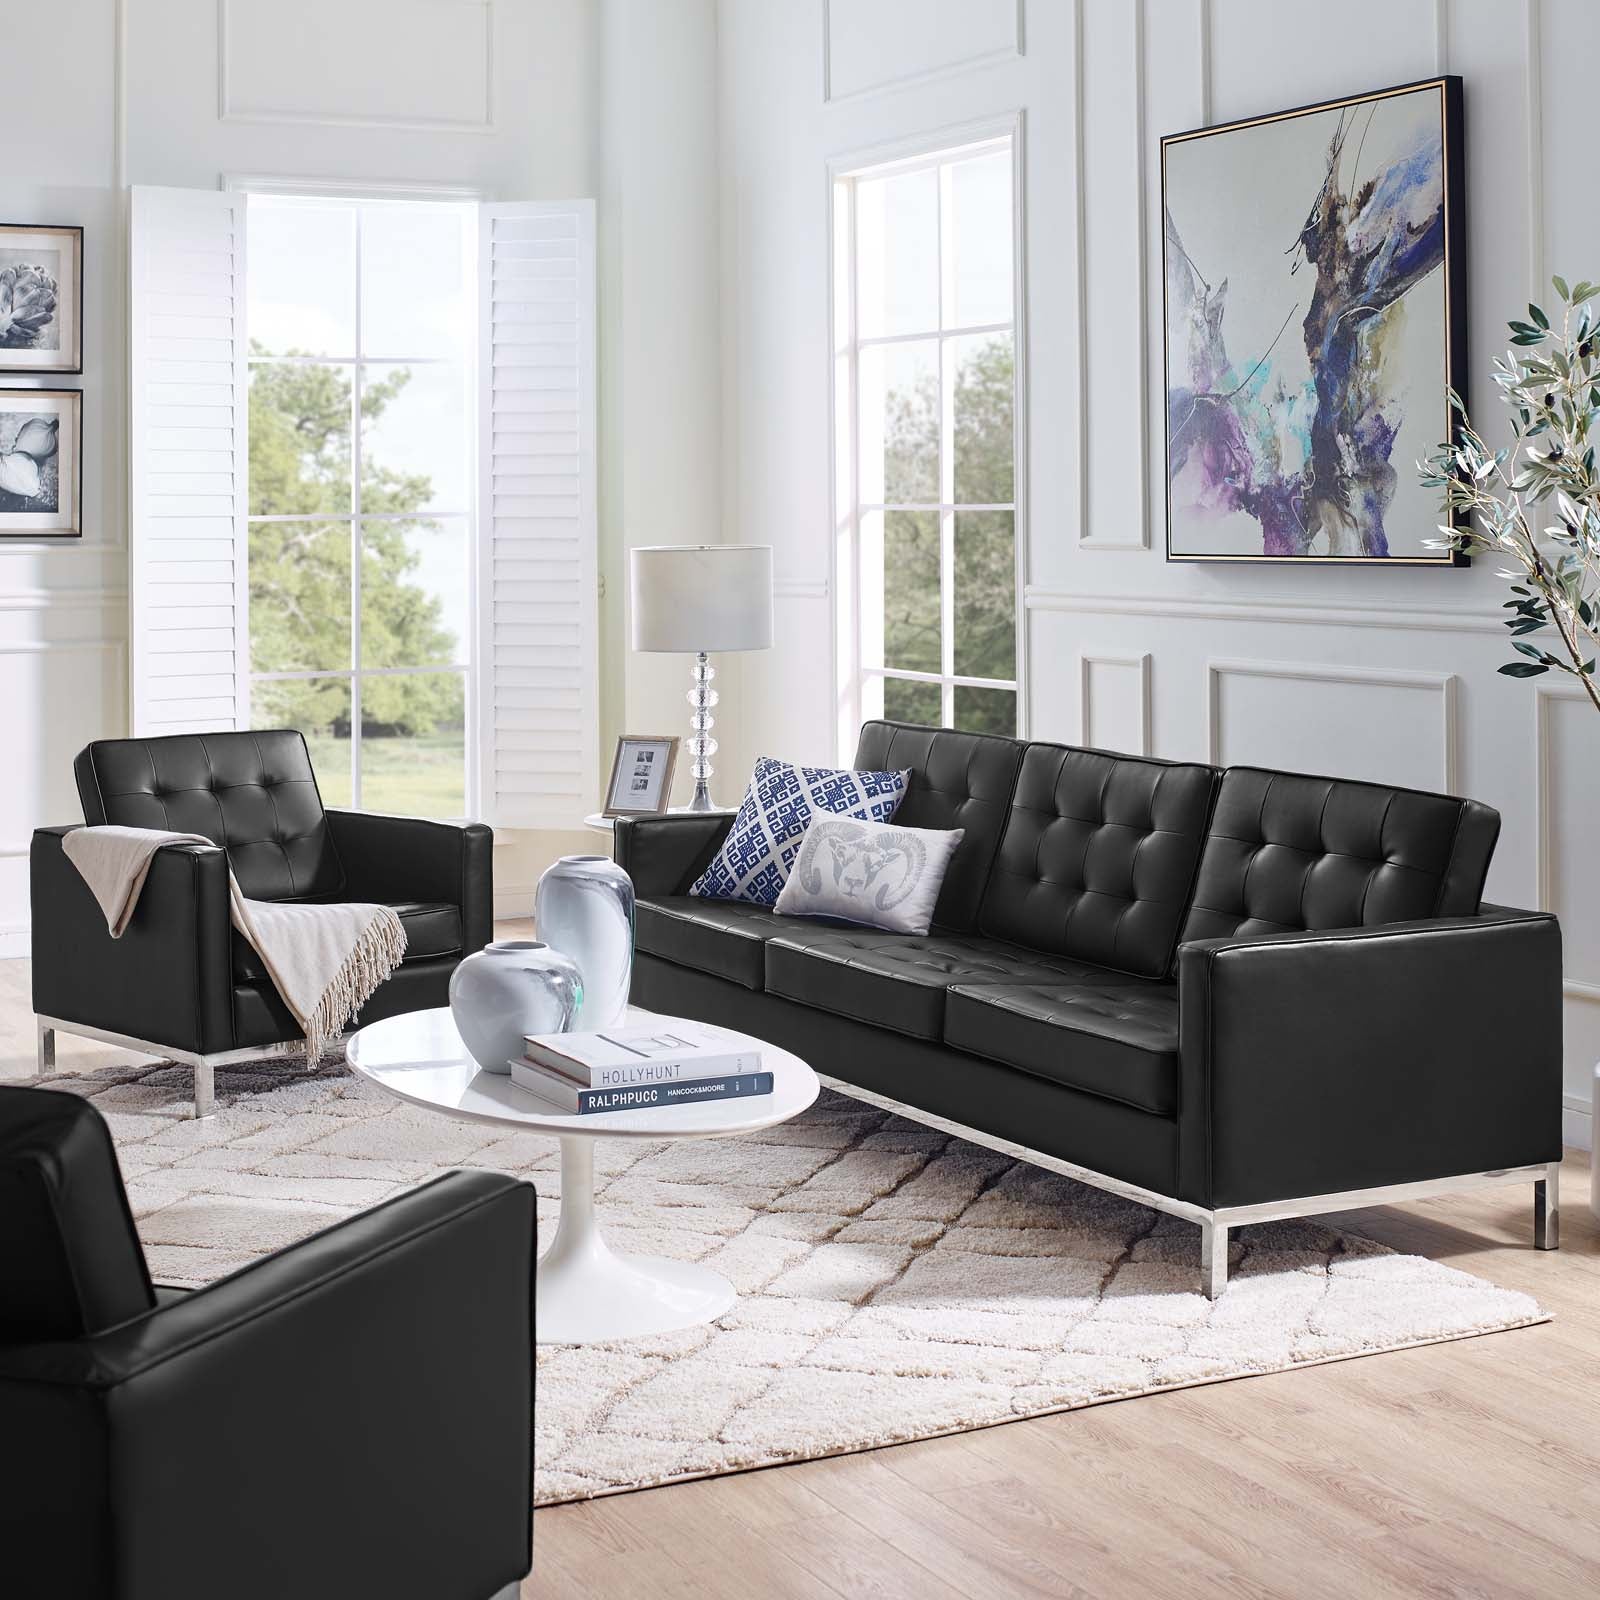 Loft Tufted Upholstered Faux Leather Sofa and Armchair Set - East Shore Modern Home Furnishings